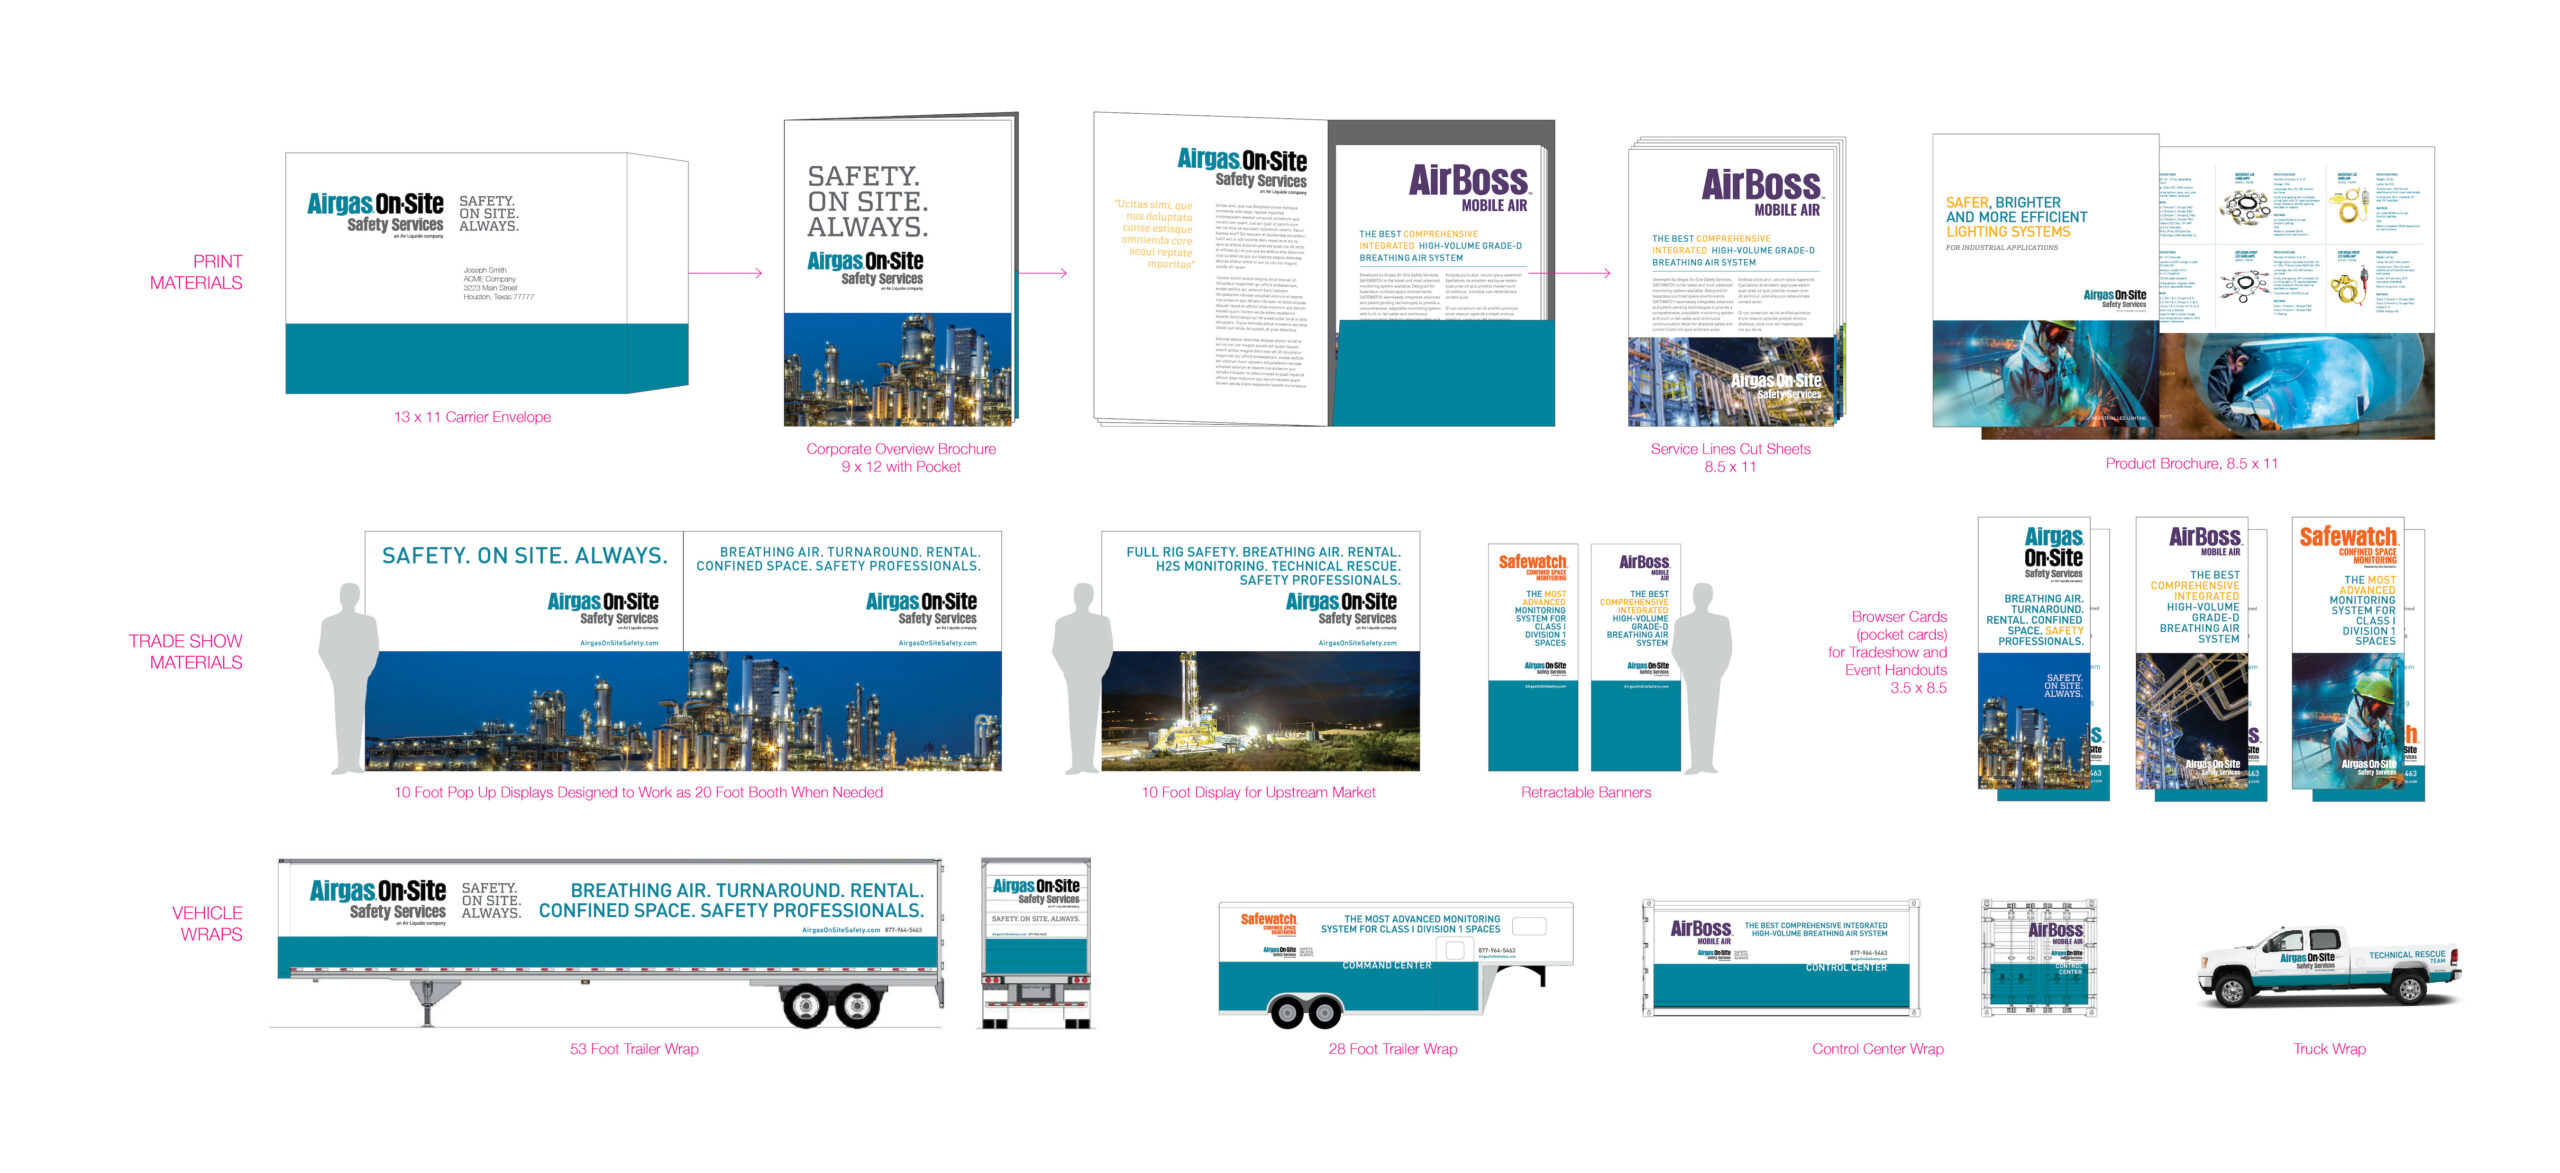 Airgas On Site Safety collateral system